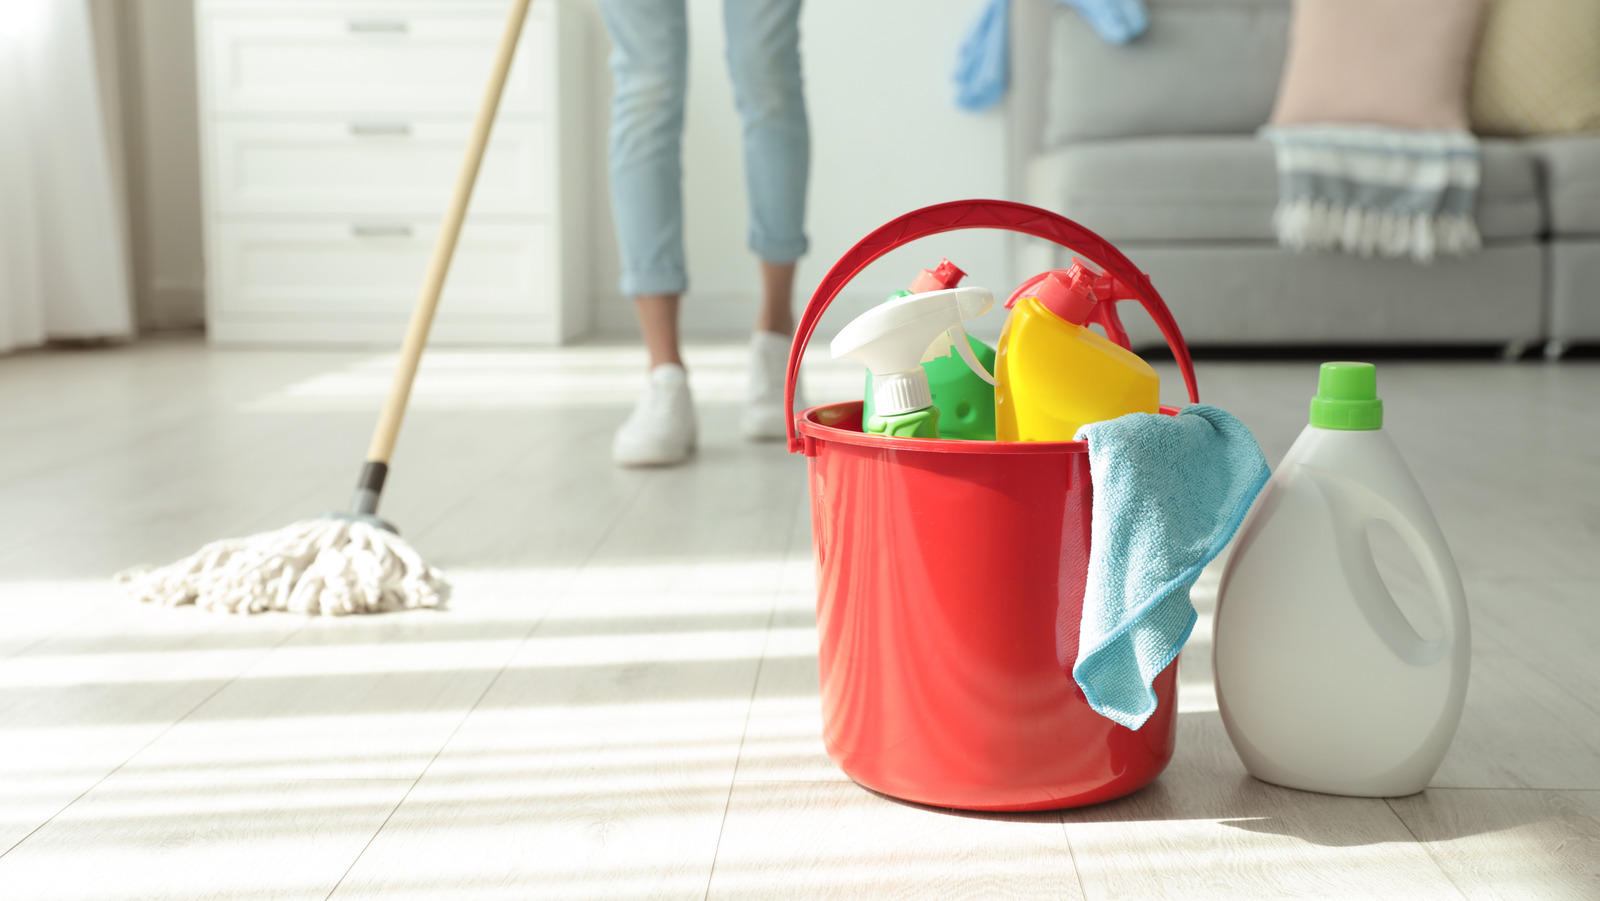 https://www.housedigest.com/img/gallery/an-electric-scrubber-will-change-how-you-clean-your-house-forever/l-intro-1697056129.jpg